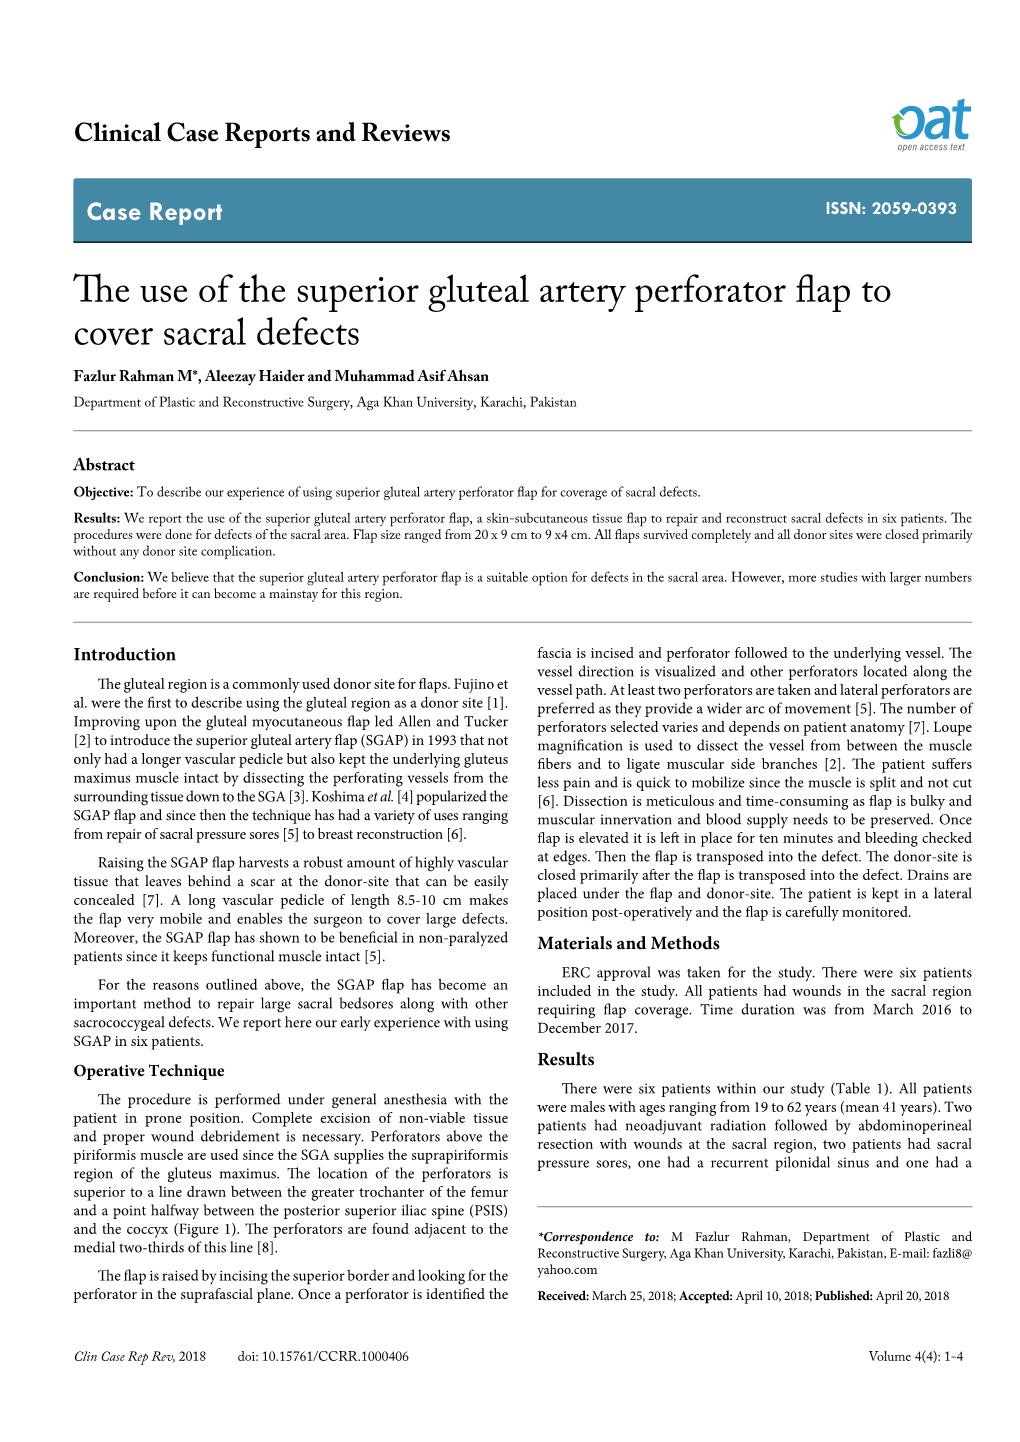 The Use of the Superior Gluteal Artery Perforator Flap to Cover Sacral Defects